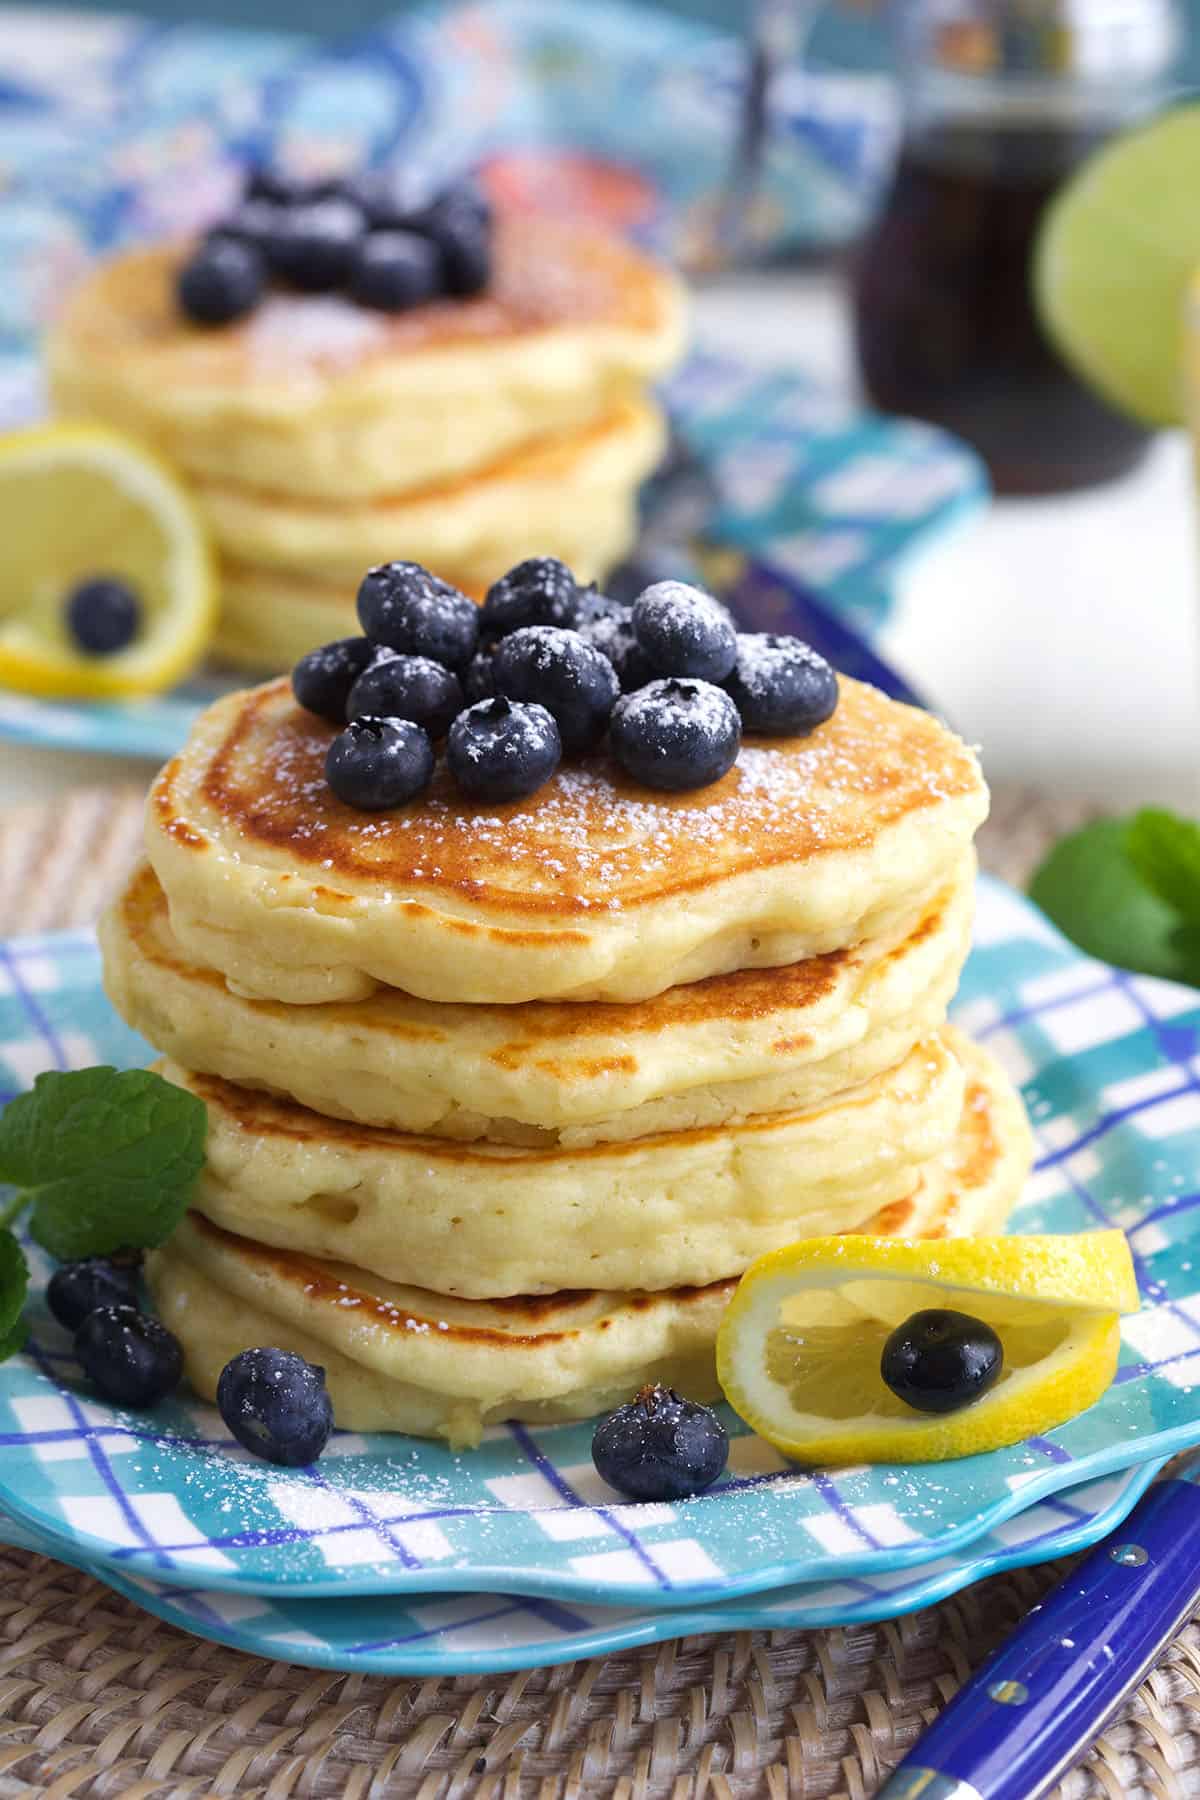 Blueberries and lemon are placed on and around the pancakes. 